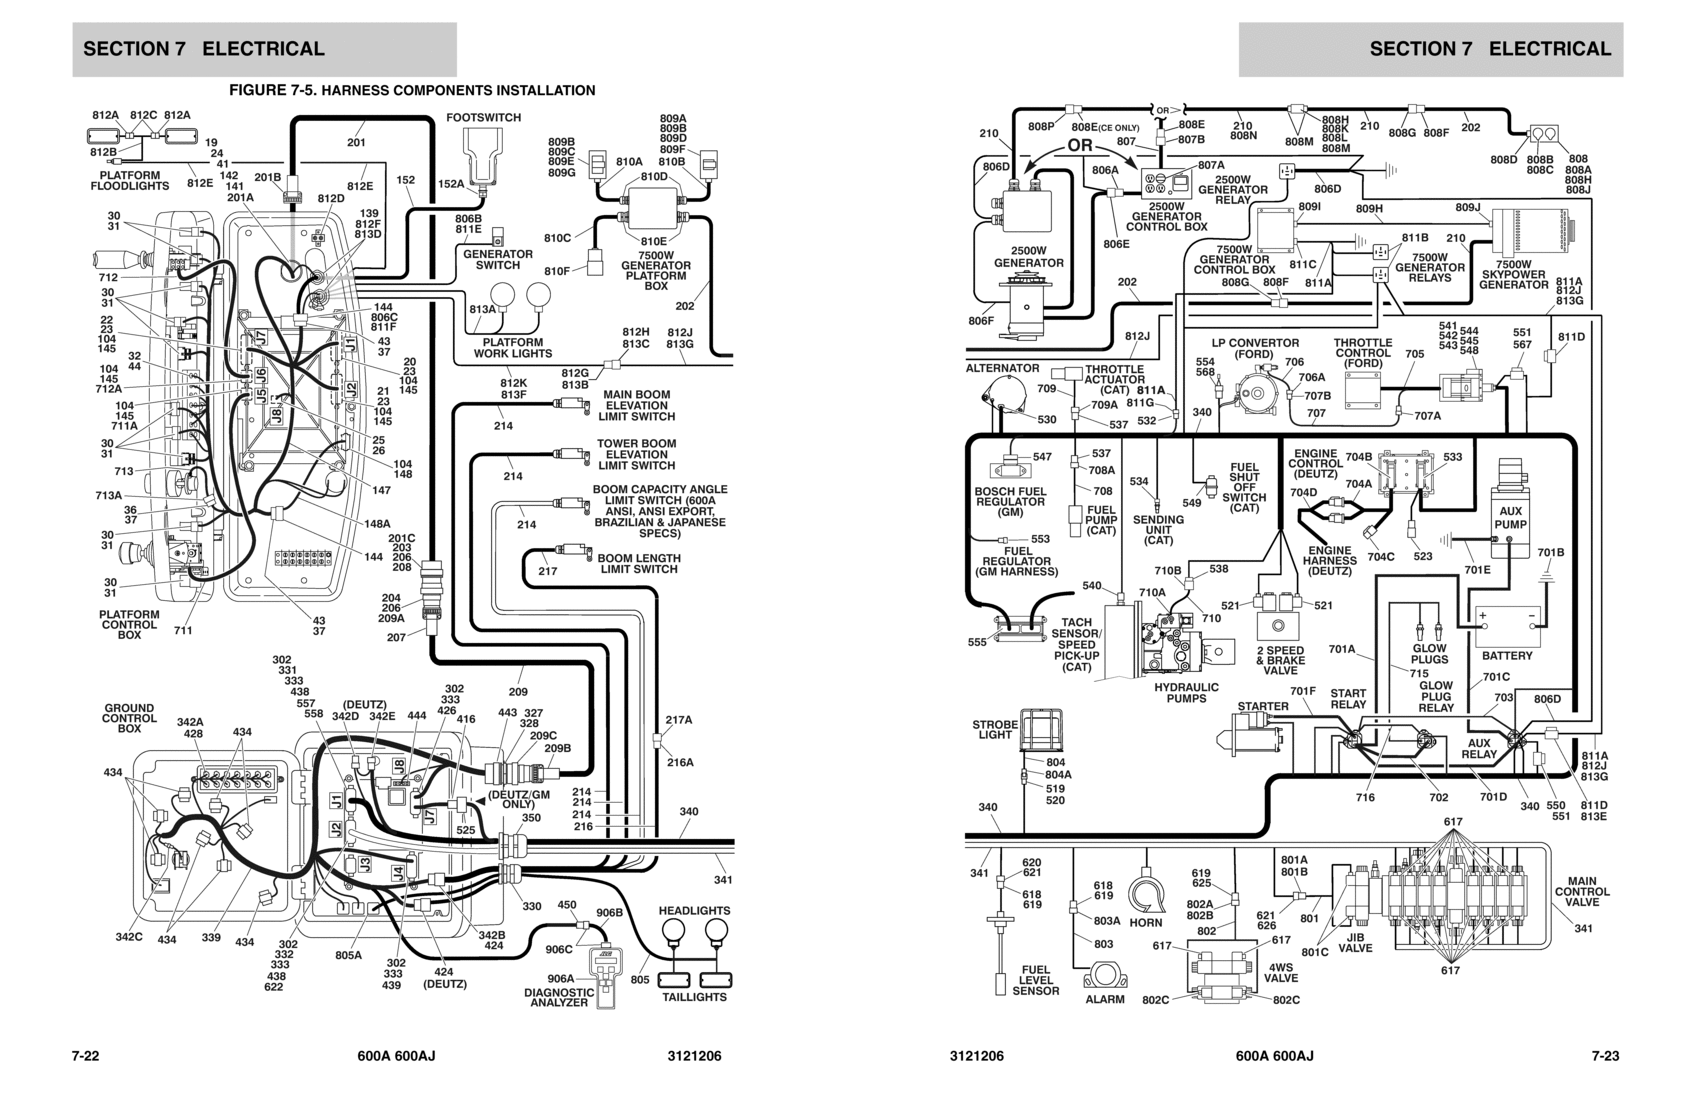 Jlg Telehandler Ignition Switch Wiring Diagram from gcironparts.com